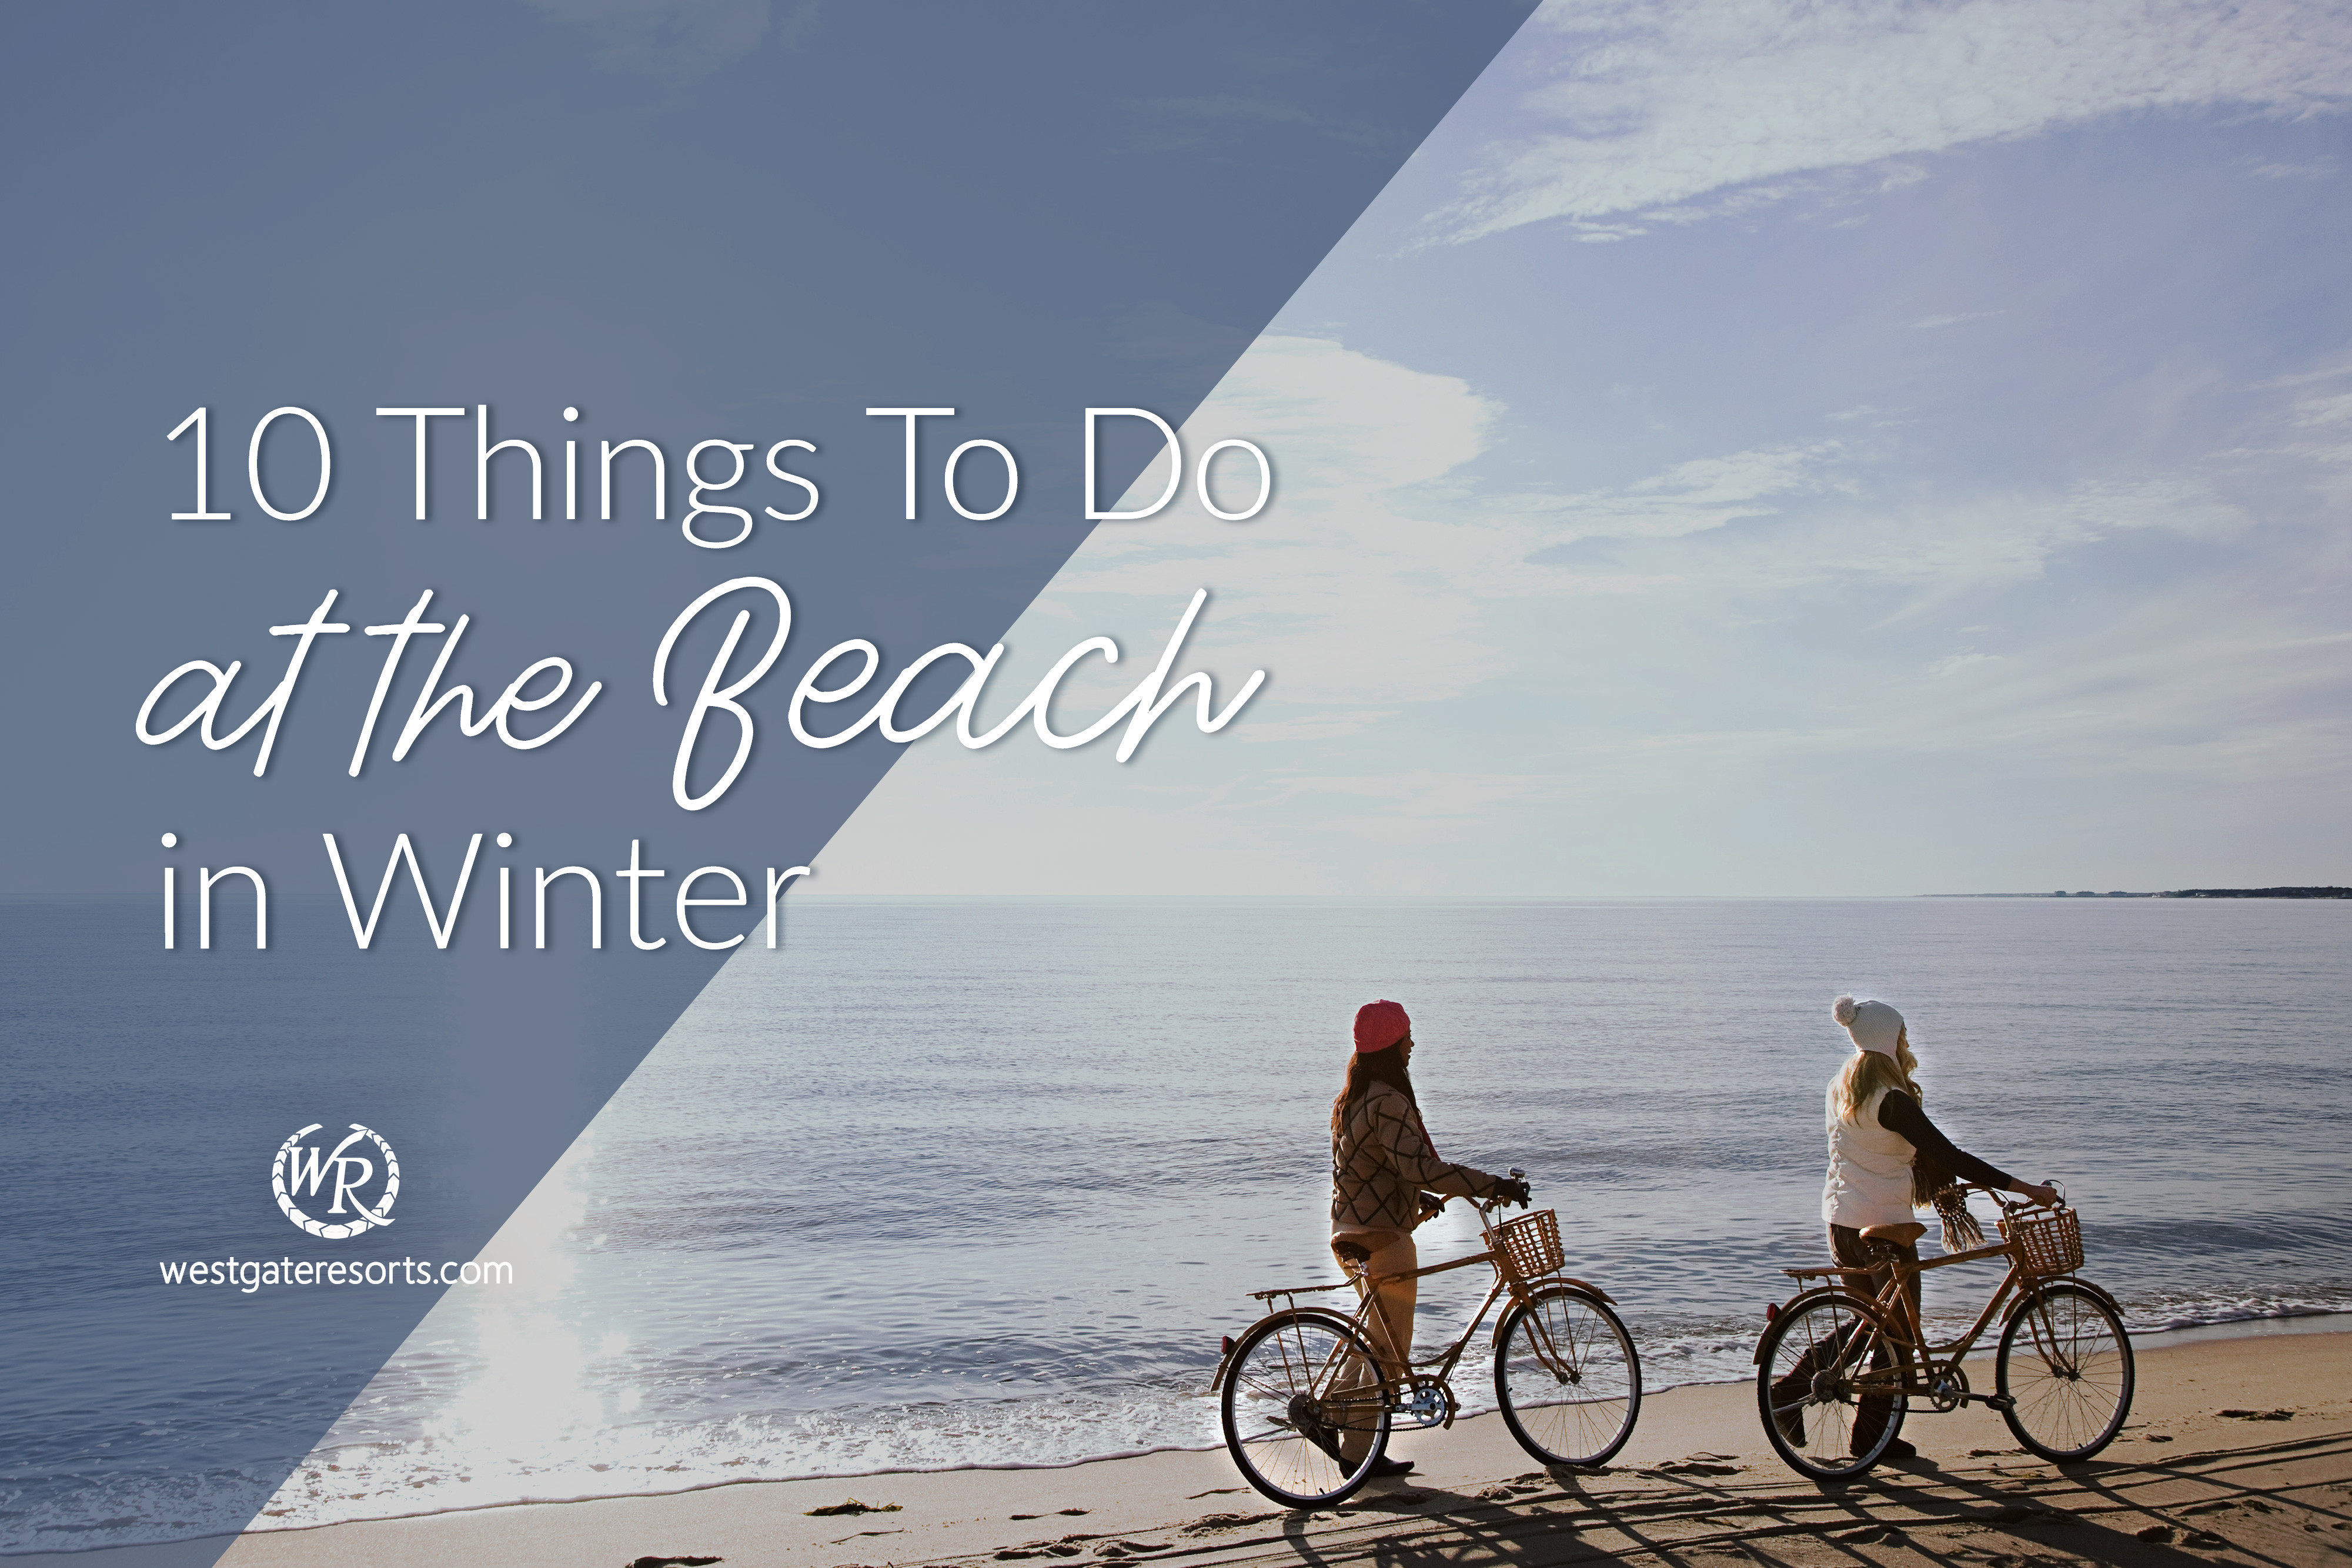 10 Things to Do at the Beach in the Winter